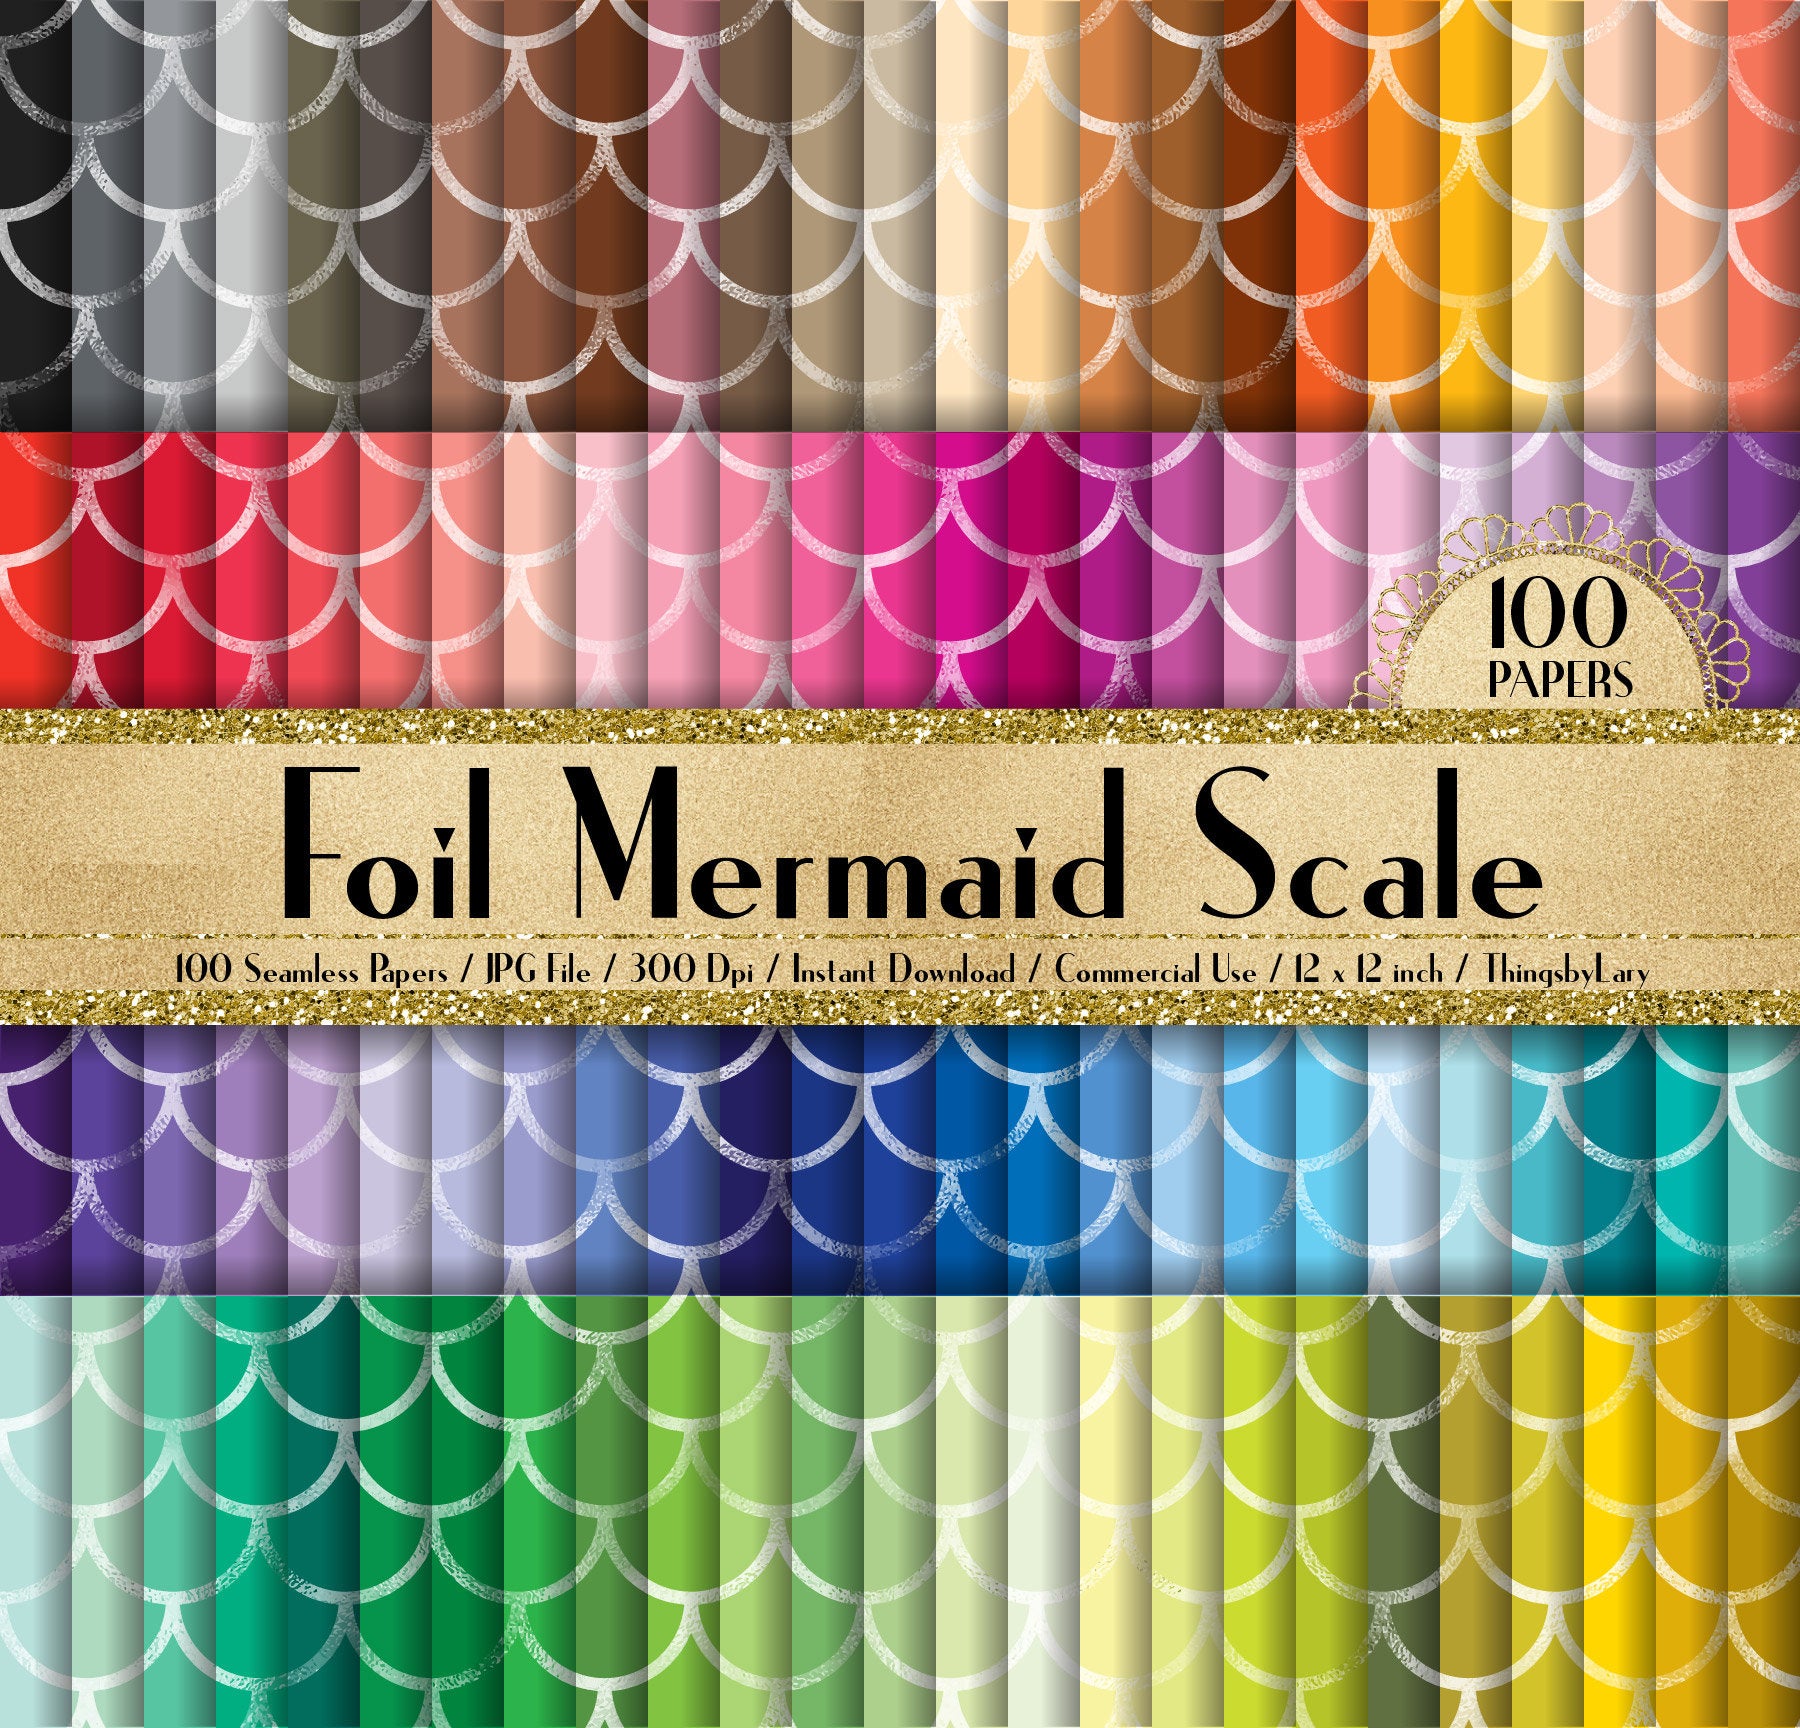 100 Seamless Foil Mermaid Scale Papers 12 inch 300 Dpi Instant Download Commercial Use, Planner Paper, Scrapbooking Mermaid Kit, Seamless